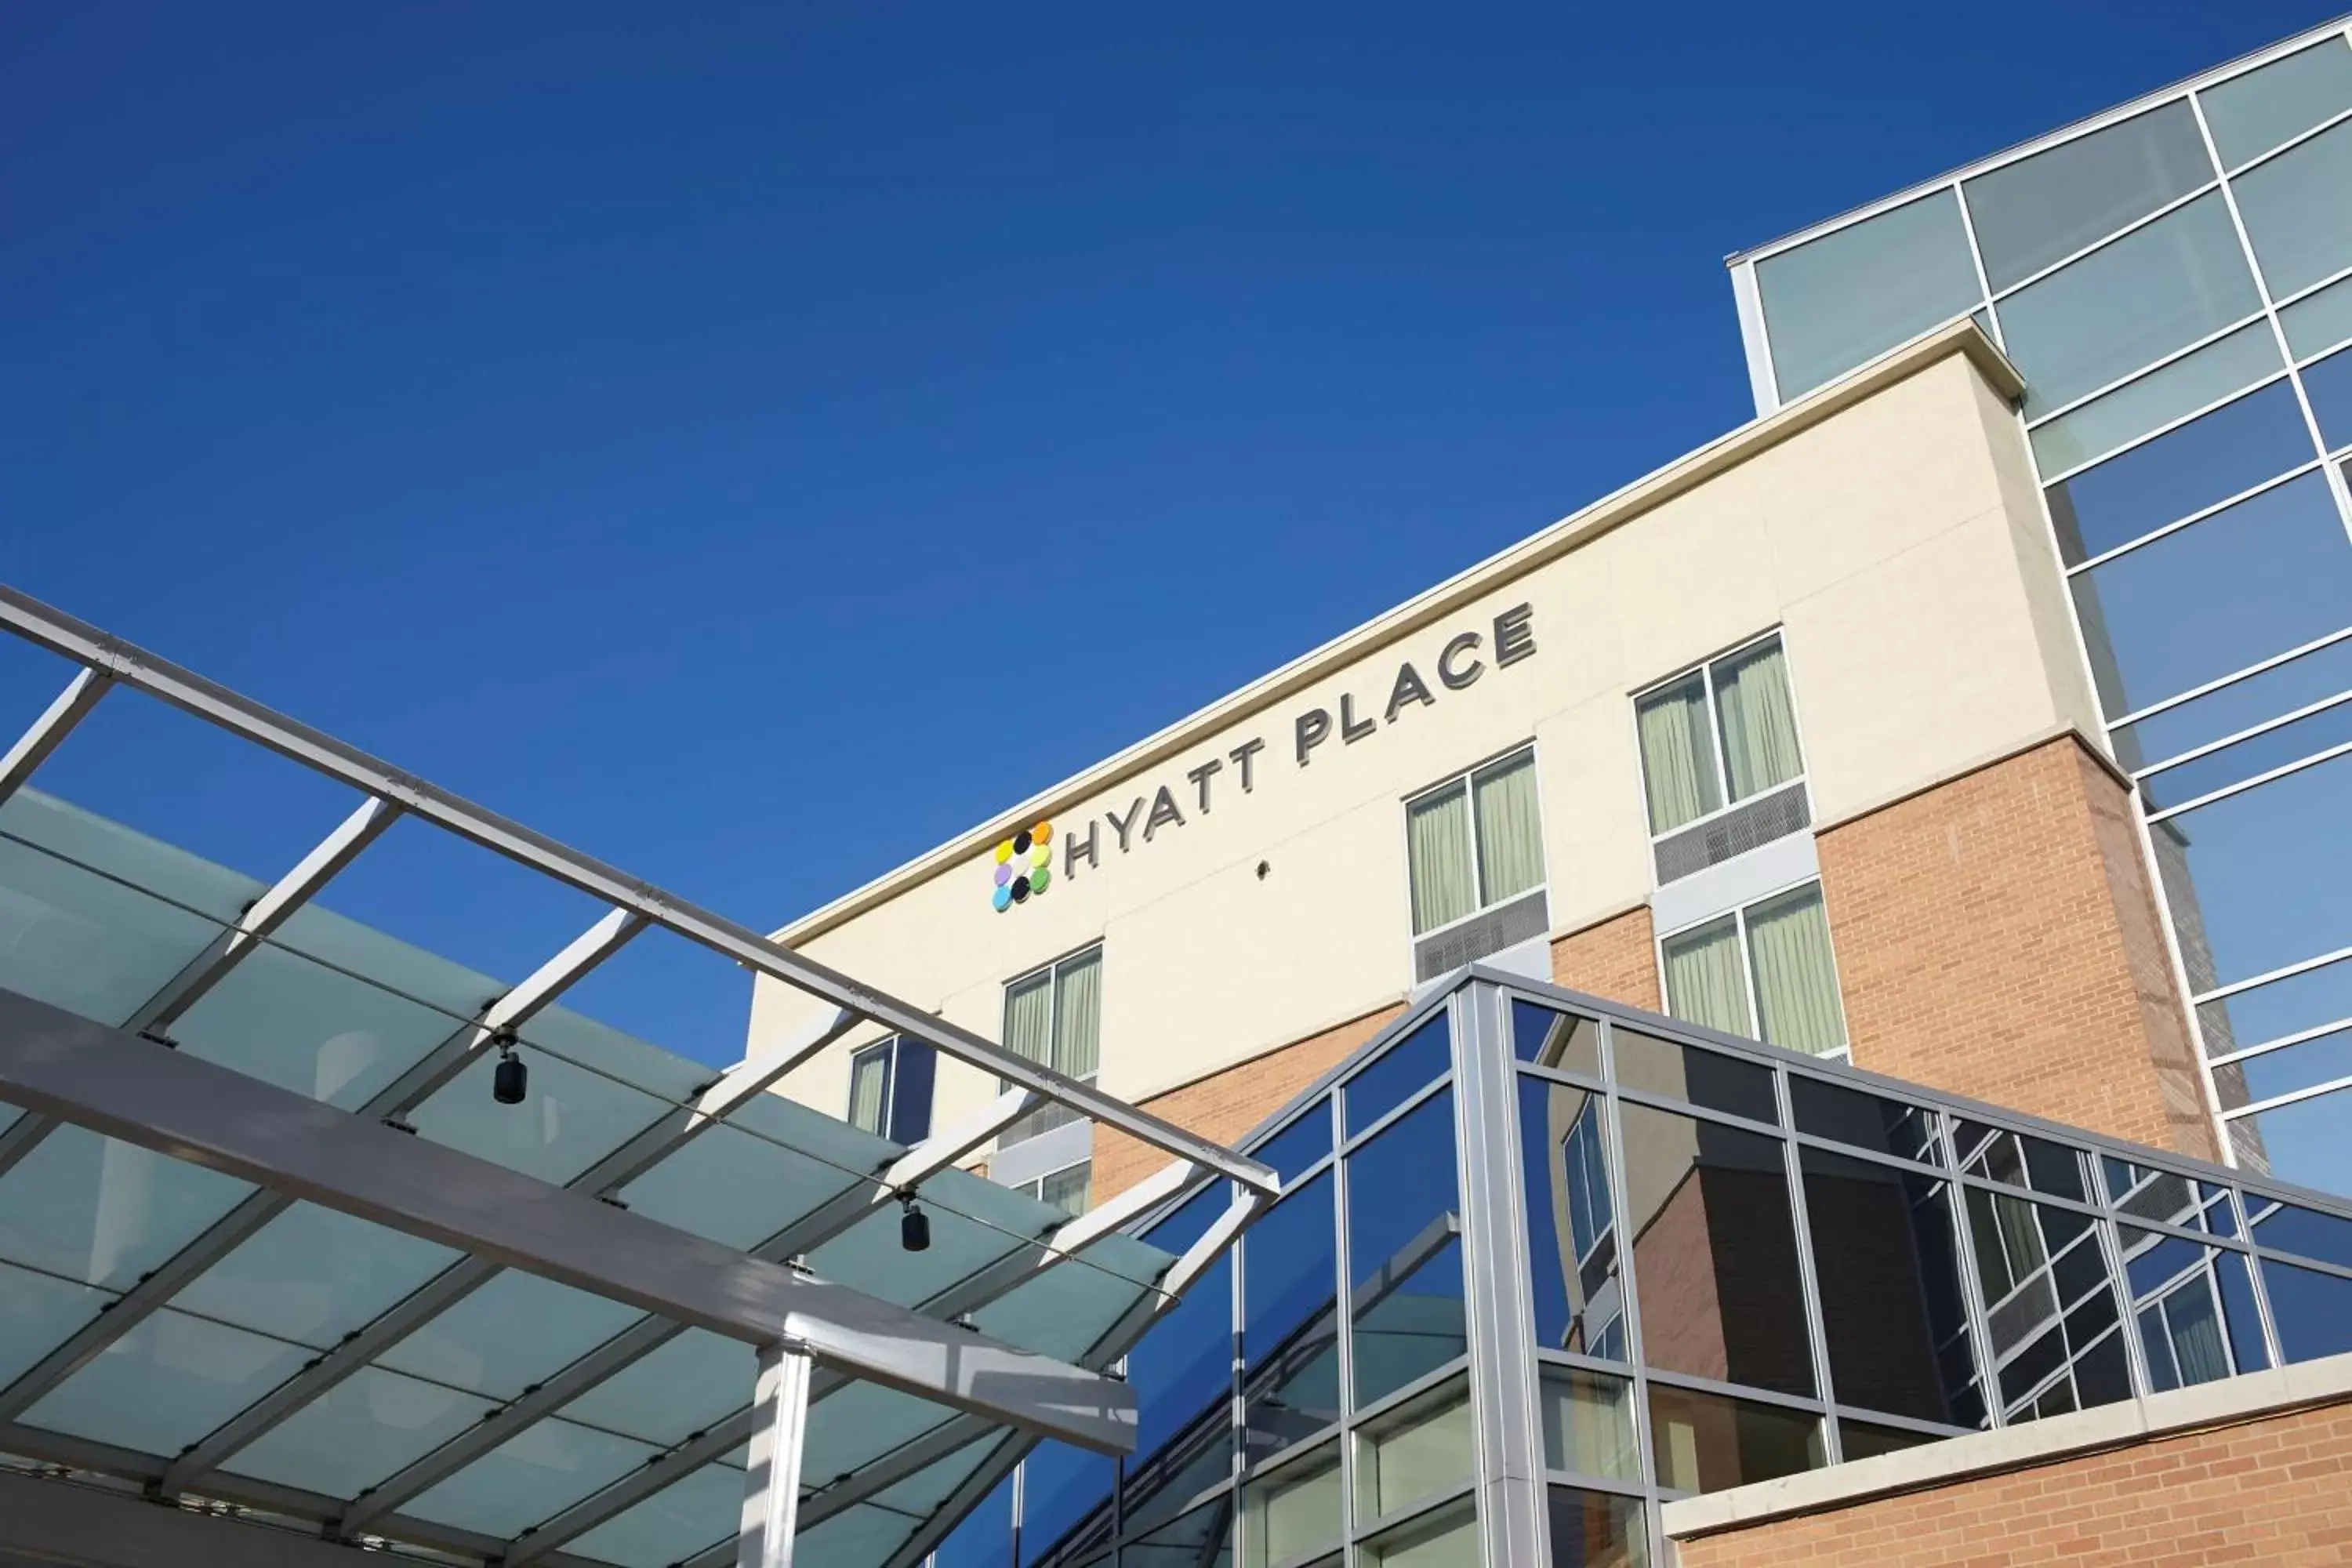 Property building in Hyatt Place South Bend/Mishawaka